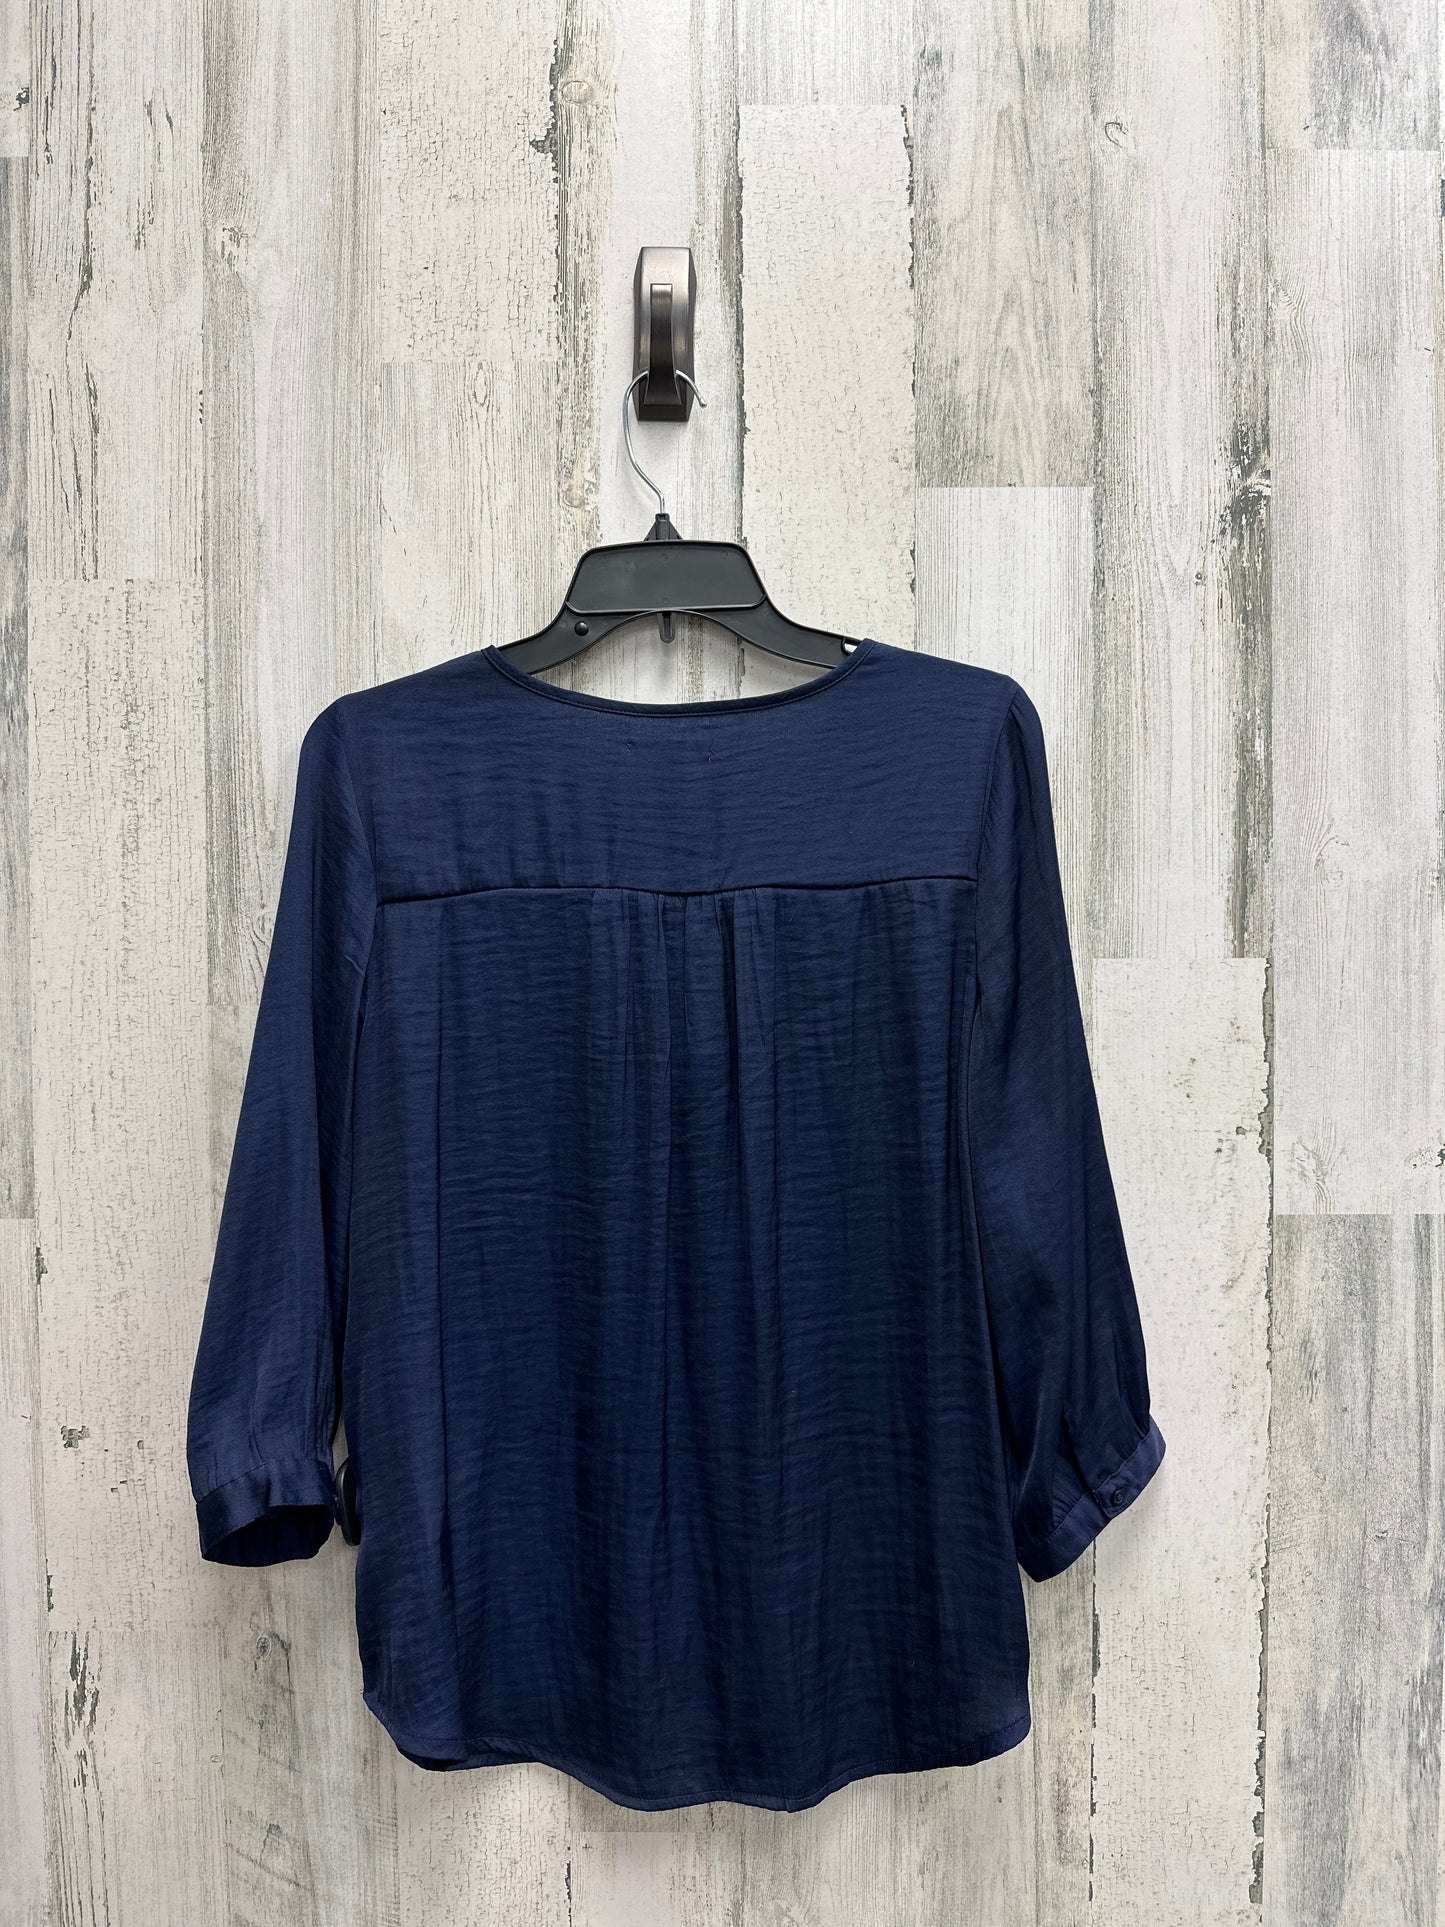 Top Long Sleeve By Gap  Size: S